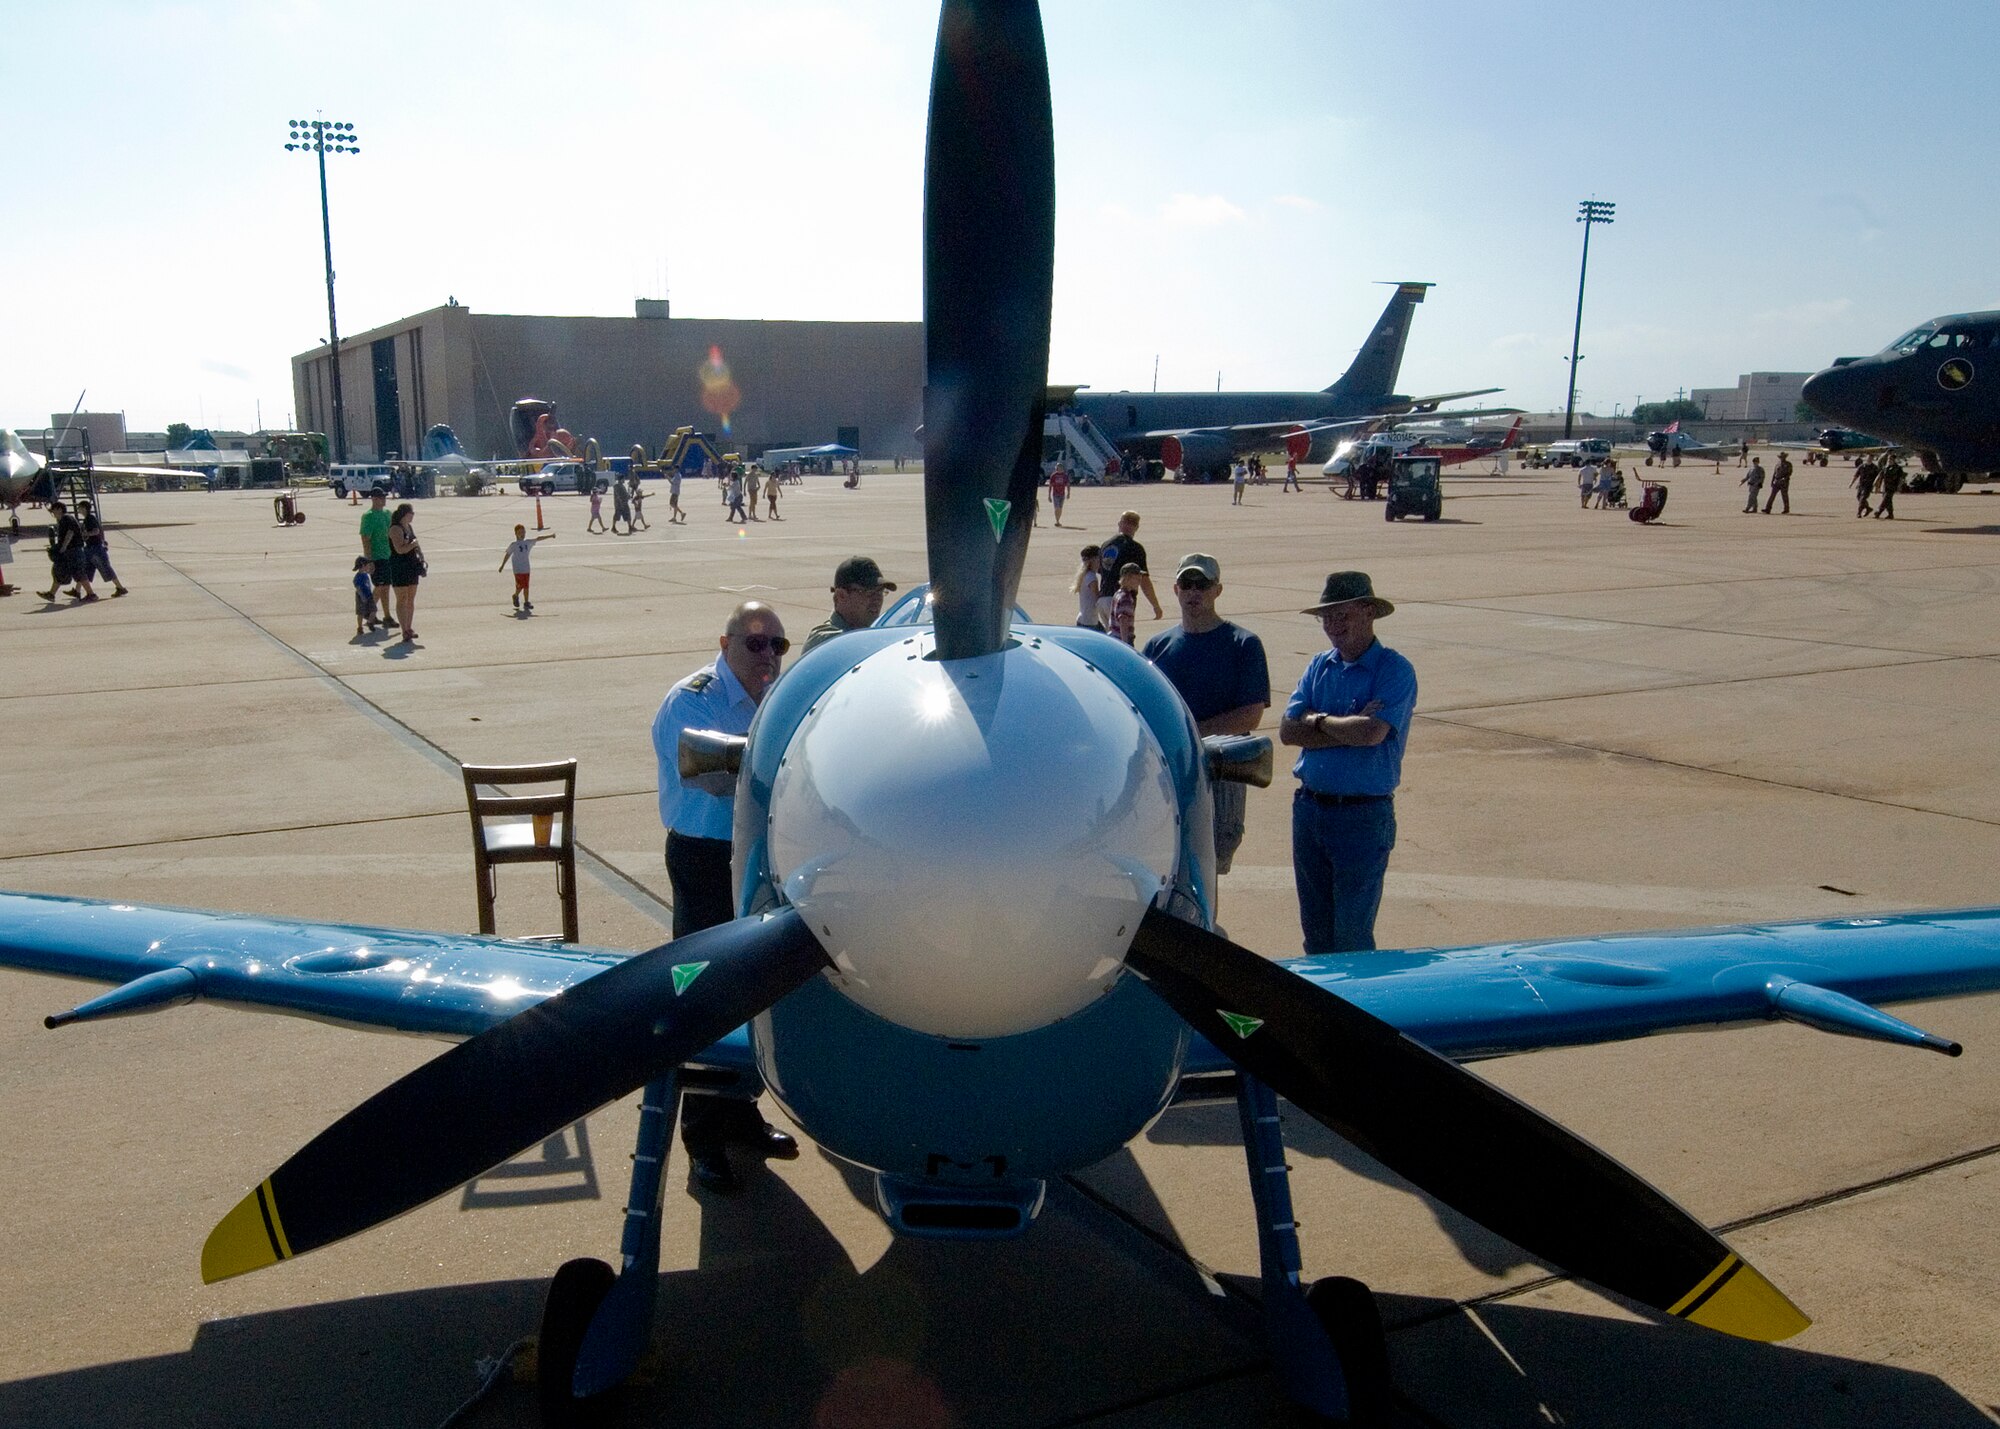 Spectators admire a Supermarine Spitfire during the Dyess Big Country Airfest April 28, 2012, at Dyess Air Force Base, Texas. The airfest included many World War II aircraft including the B-17 Flying Fortress, B-25 Mitchell and Mitsubishi A6M Zero. (U.S. Air Force photo by Airman 1st Class Damon Kasberg/Released)